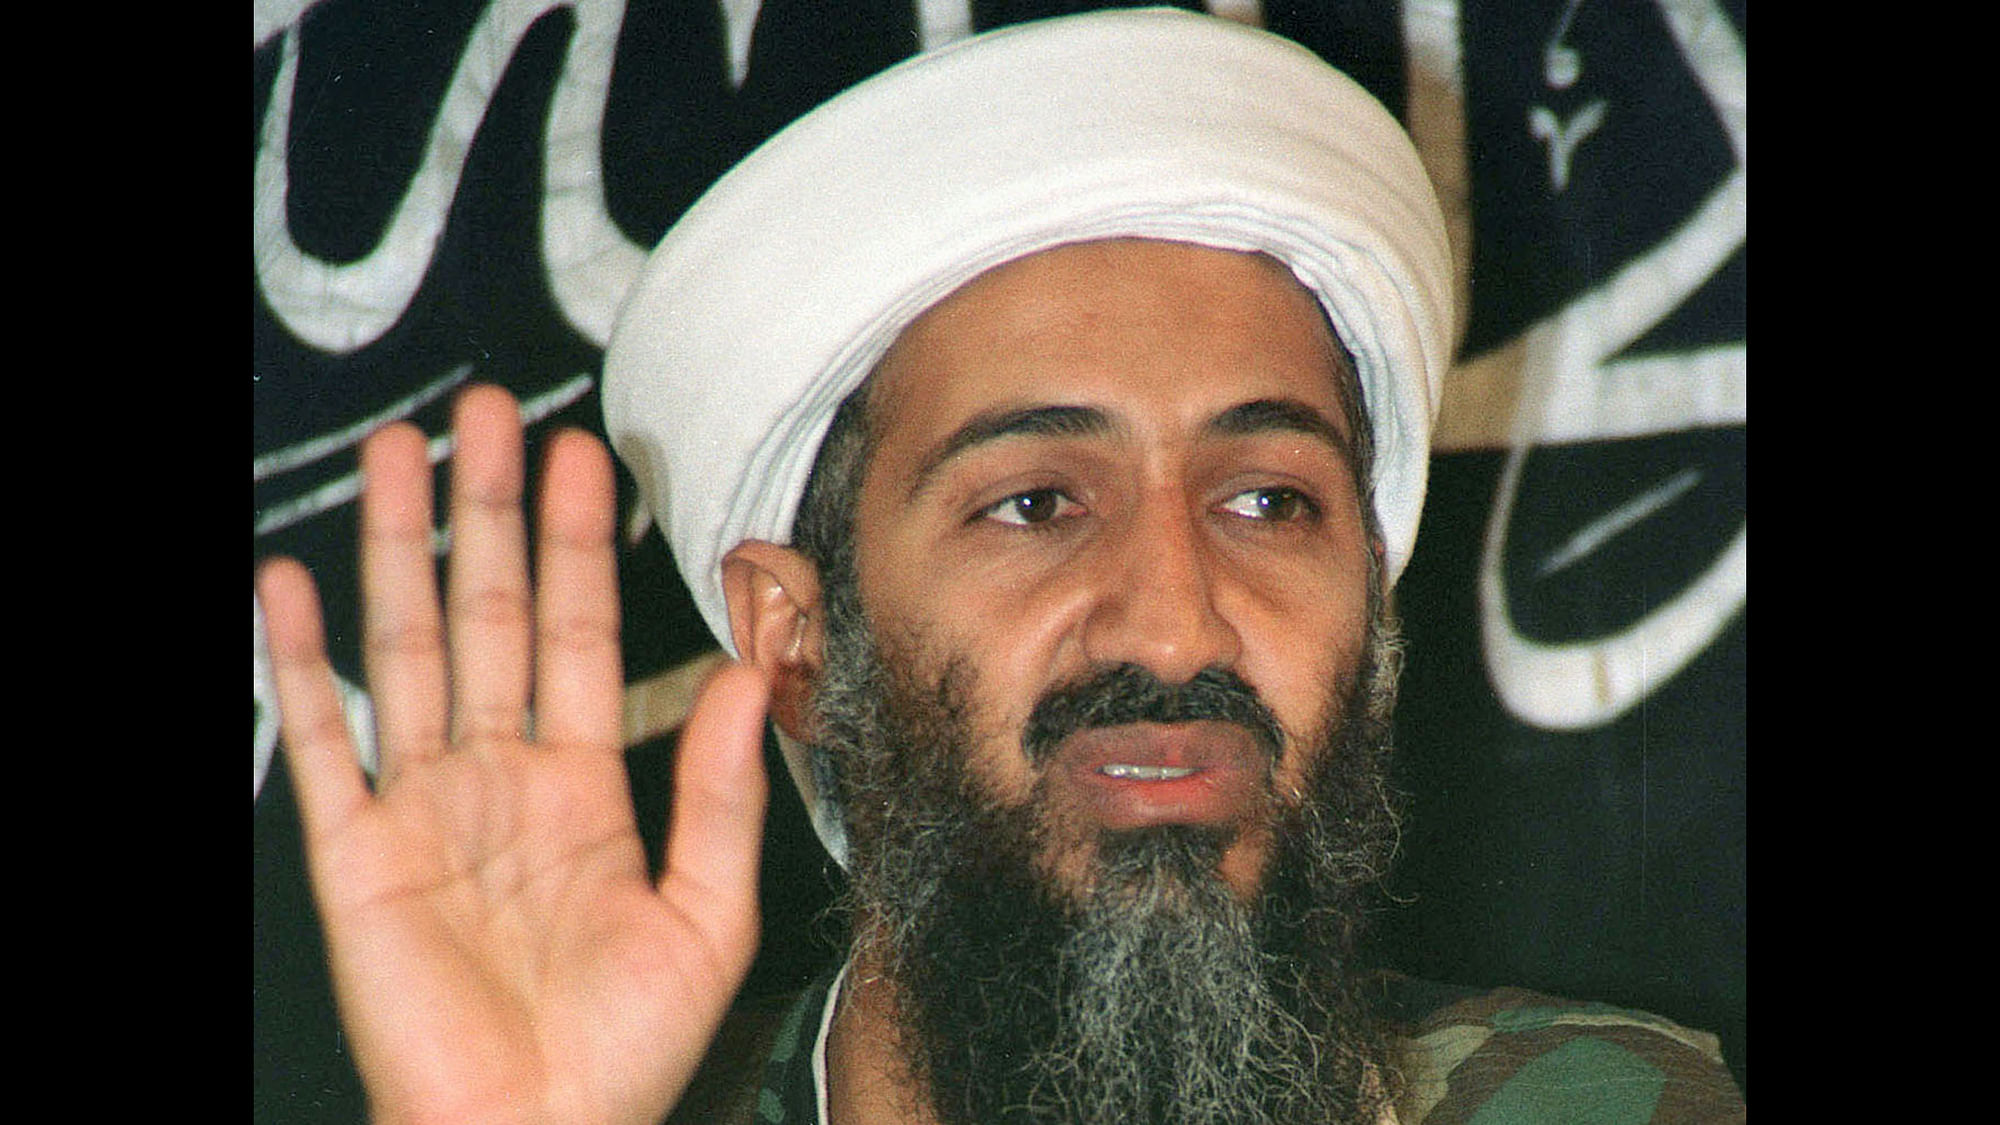 File photo of Osama bin Laden at a news conference in 1998. (Photo: Reuters)